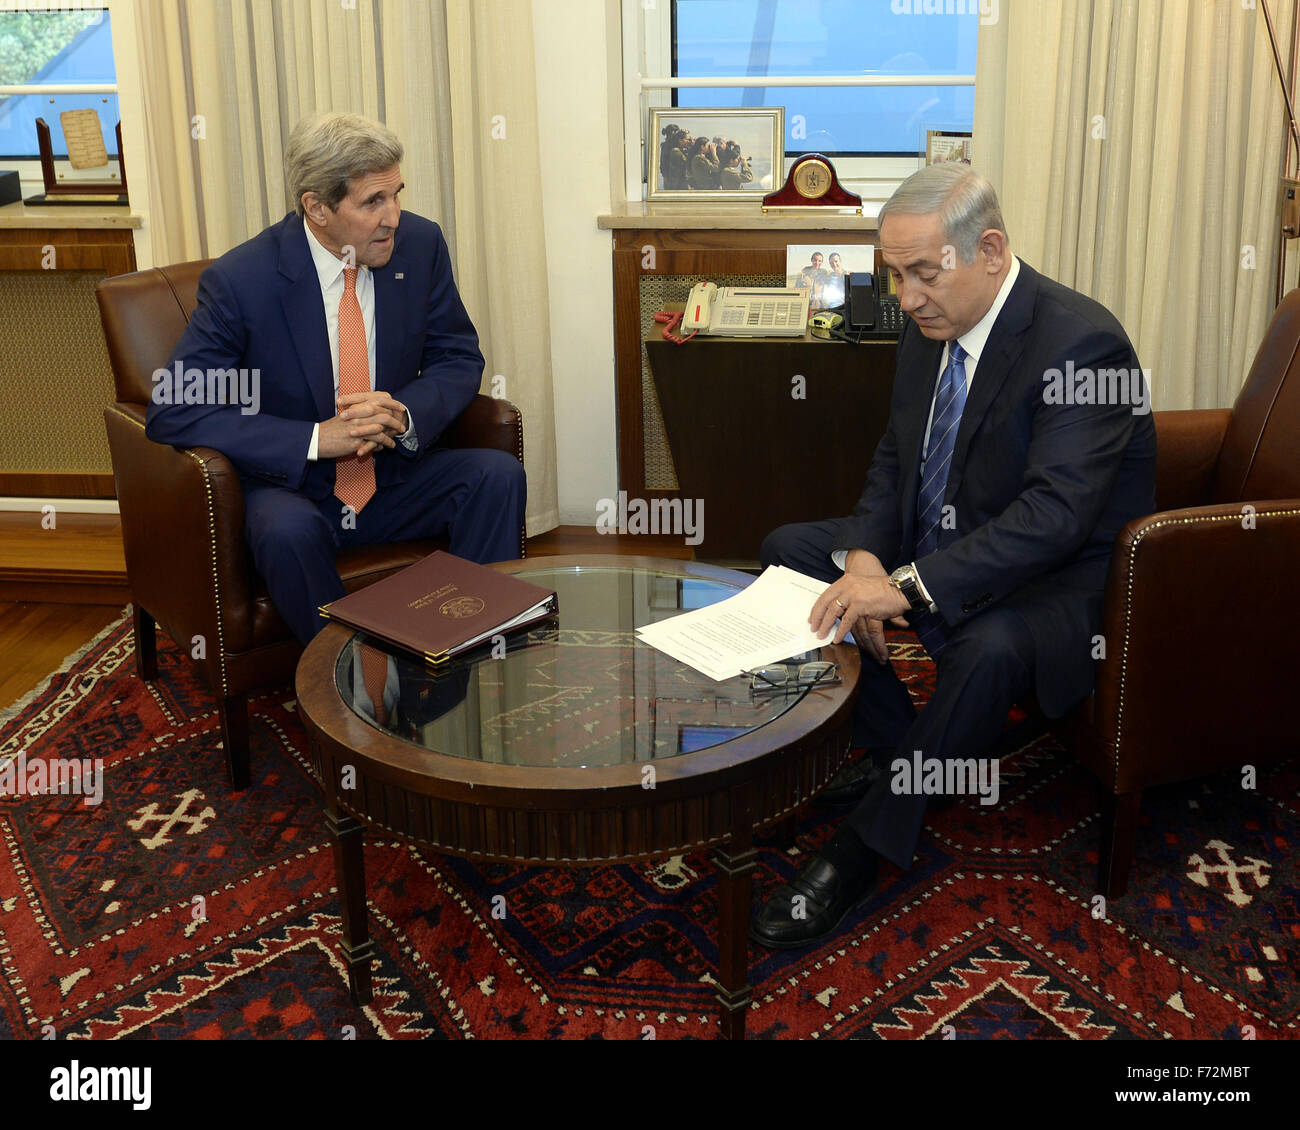 Jerusalem. 24th Nov, 2015. Israeli Prime Minister Benjamin Netanyahu (R) meets with visiting U.S. Secretary of State John Kerry in Jerusalem, on Nov. 24, 2015. Kerry arrived here on Tuesday morning to pay a visit to Israel and the West Bank in hopes of curtailing the two-month long wave of violence. Credit:  U.S. Embassy to Israel/Matty Stern/Xinhua/Alamy Live News Stock Photo